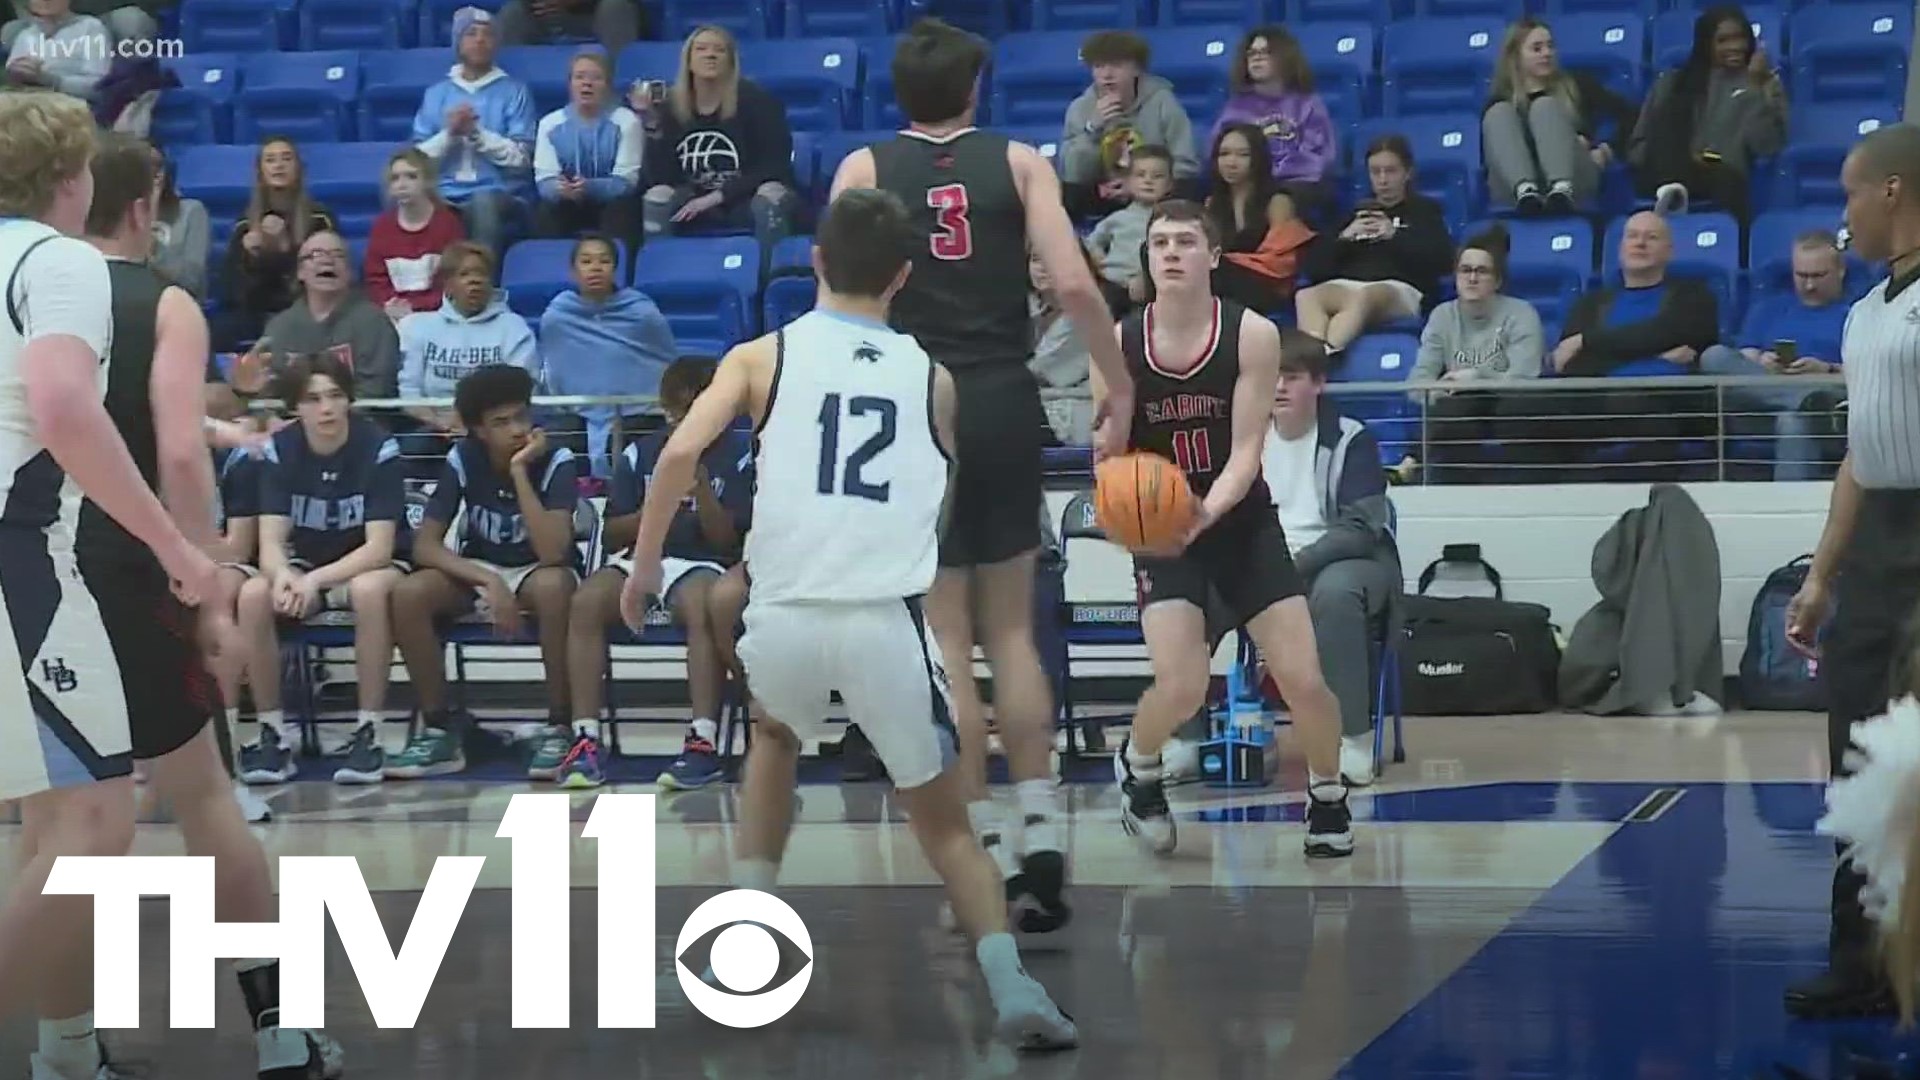 Cabot kept its season alive with a 44-38 victory over Springdale Har-Ber. The Panthers will face Jonesboro in the semifinals of the 6A boys state tournament.